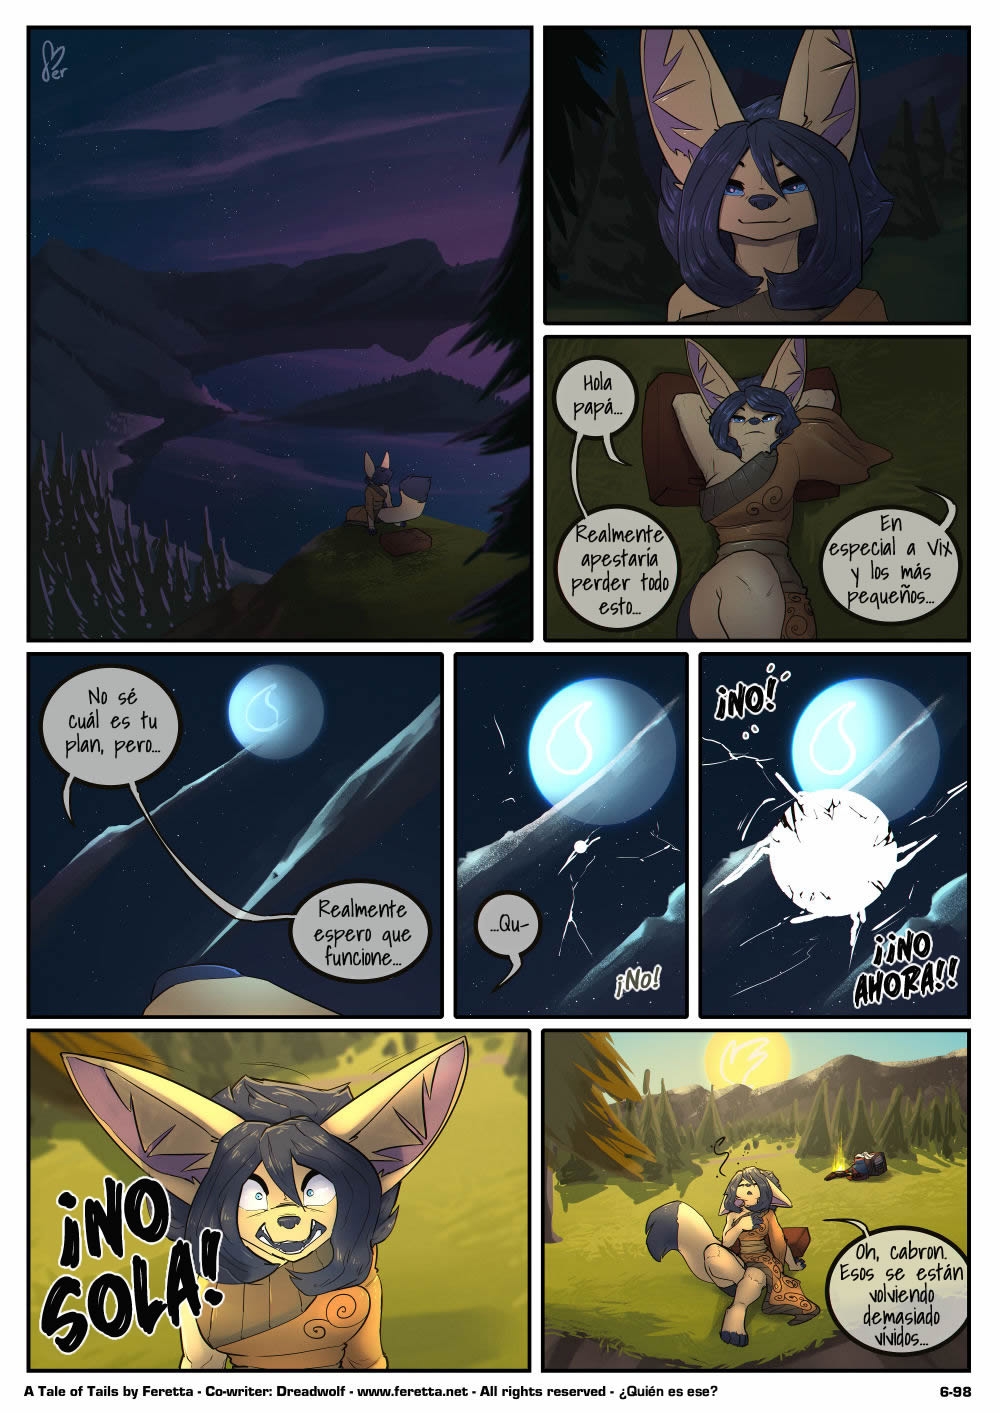 [Feretta] A Tale of Tails: Chapter 6 - Paths converge / Los caminos convergen [Spanish] [Red Fox Makkan] 98